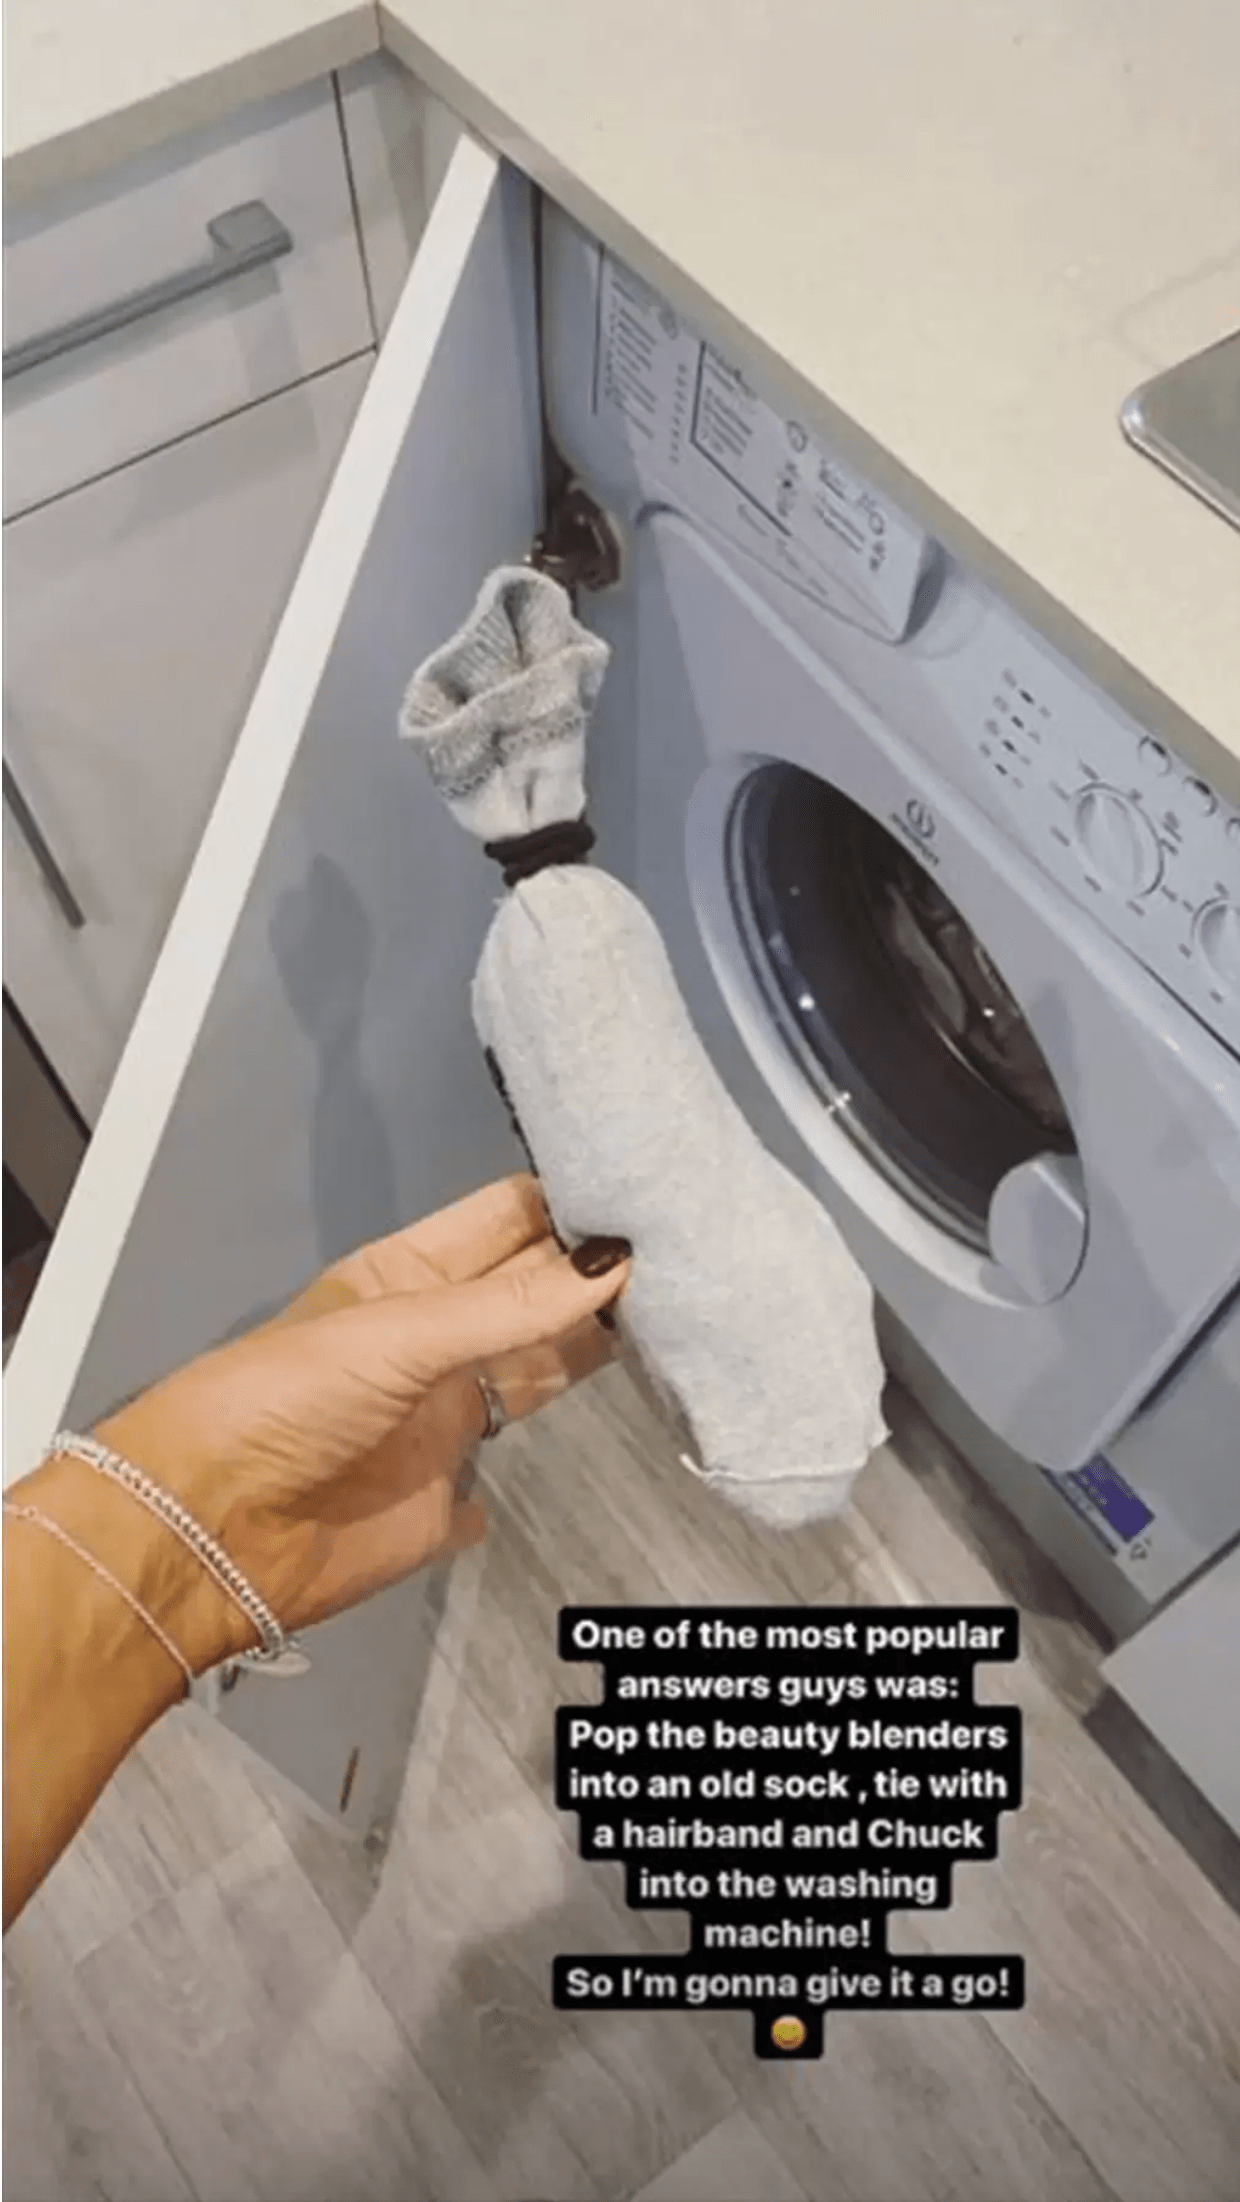 beauty blenders in a sock about to go in washing machine